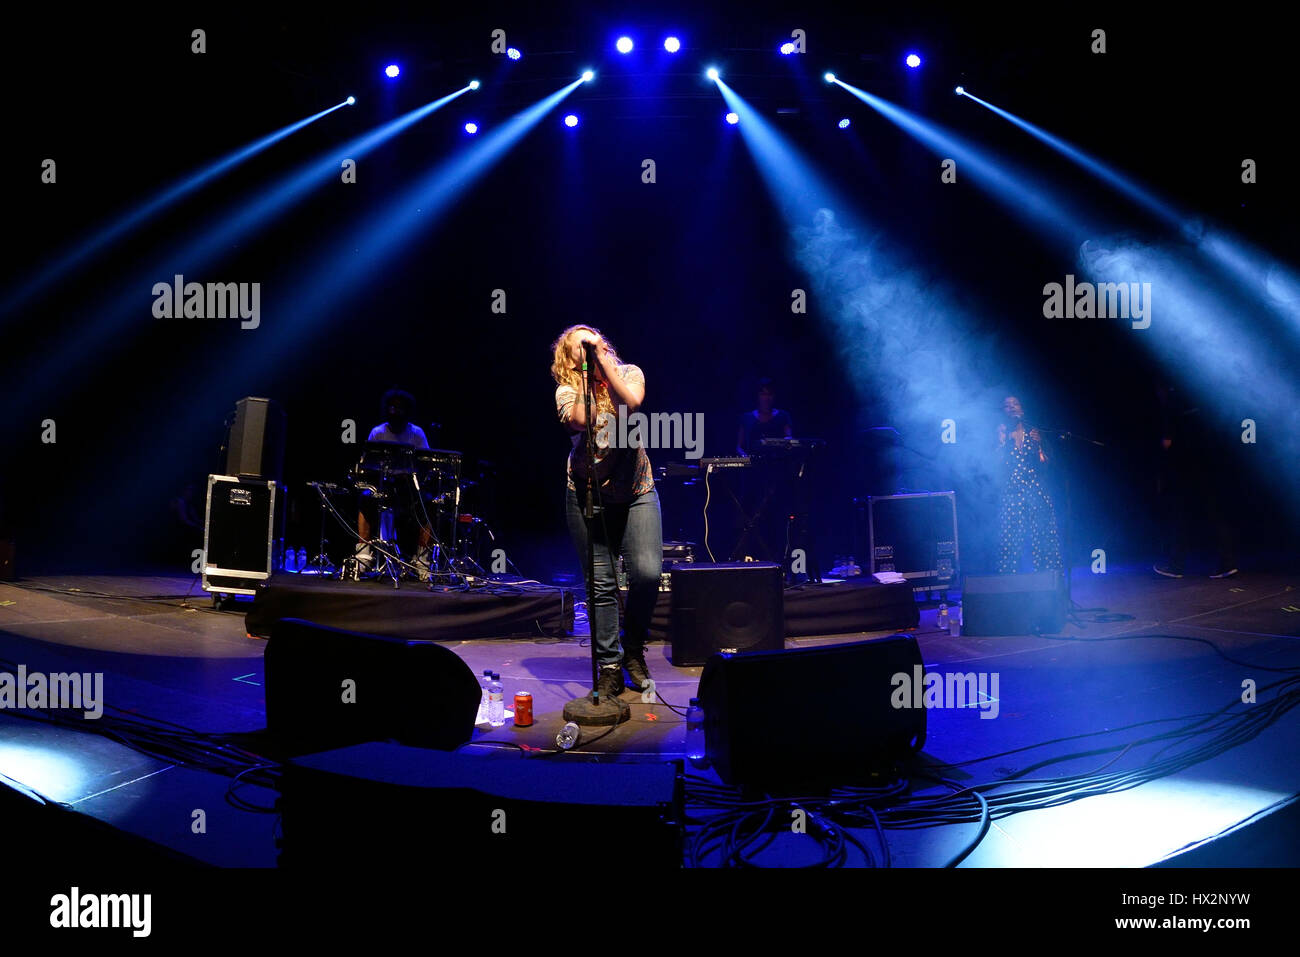 BARCELONA - JUN 19: Kate Tempest (poet, playwright, rapper and recording artist) performs at Sonar Festival on June 19, 2015 in Barcelona, Spain. Stock Photo